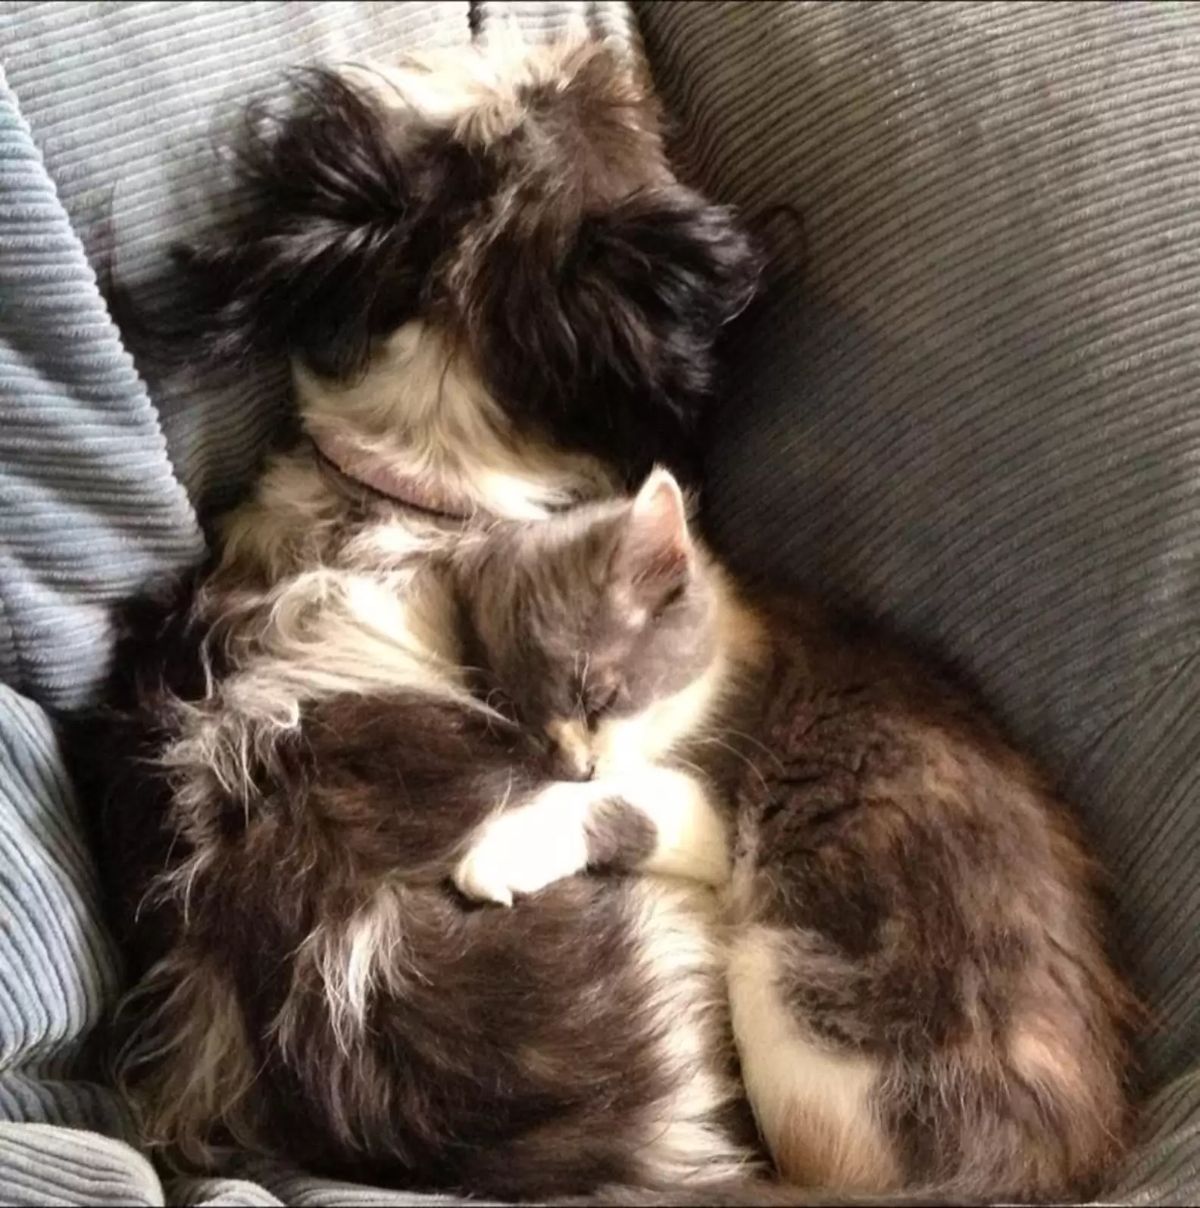 fluffy brown and white dog cuddling with a sleeping brown and white cat on a grey sofa